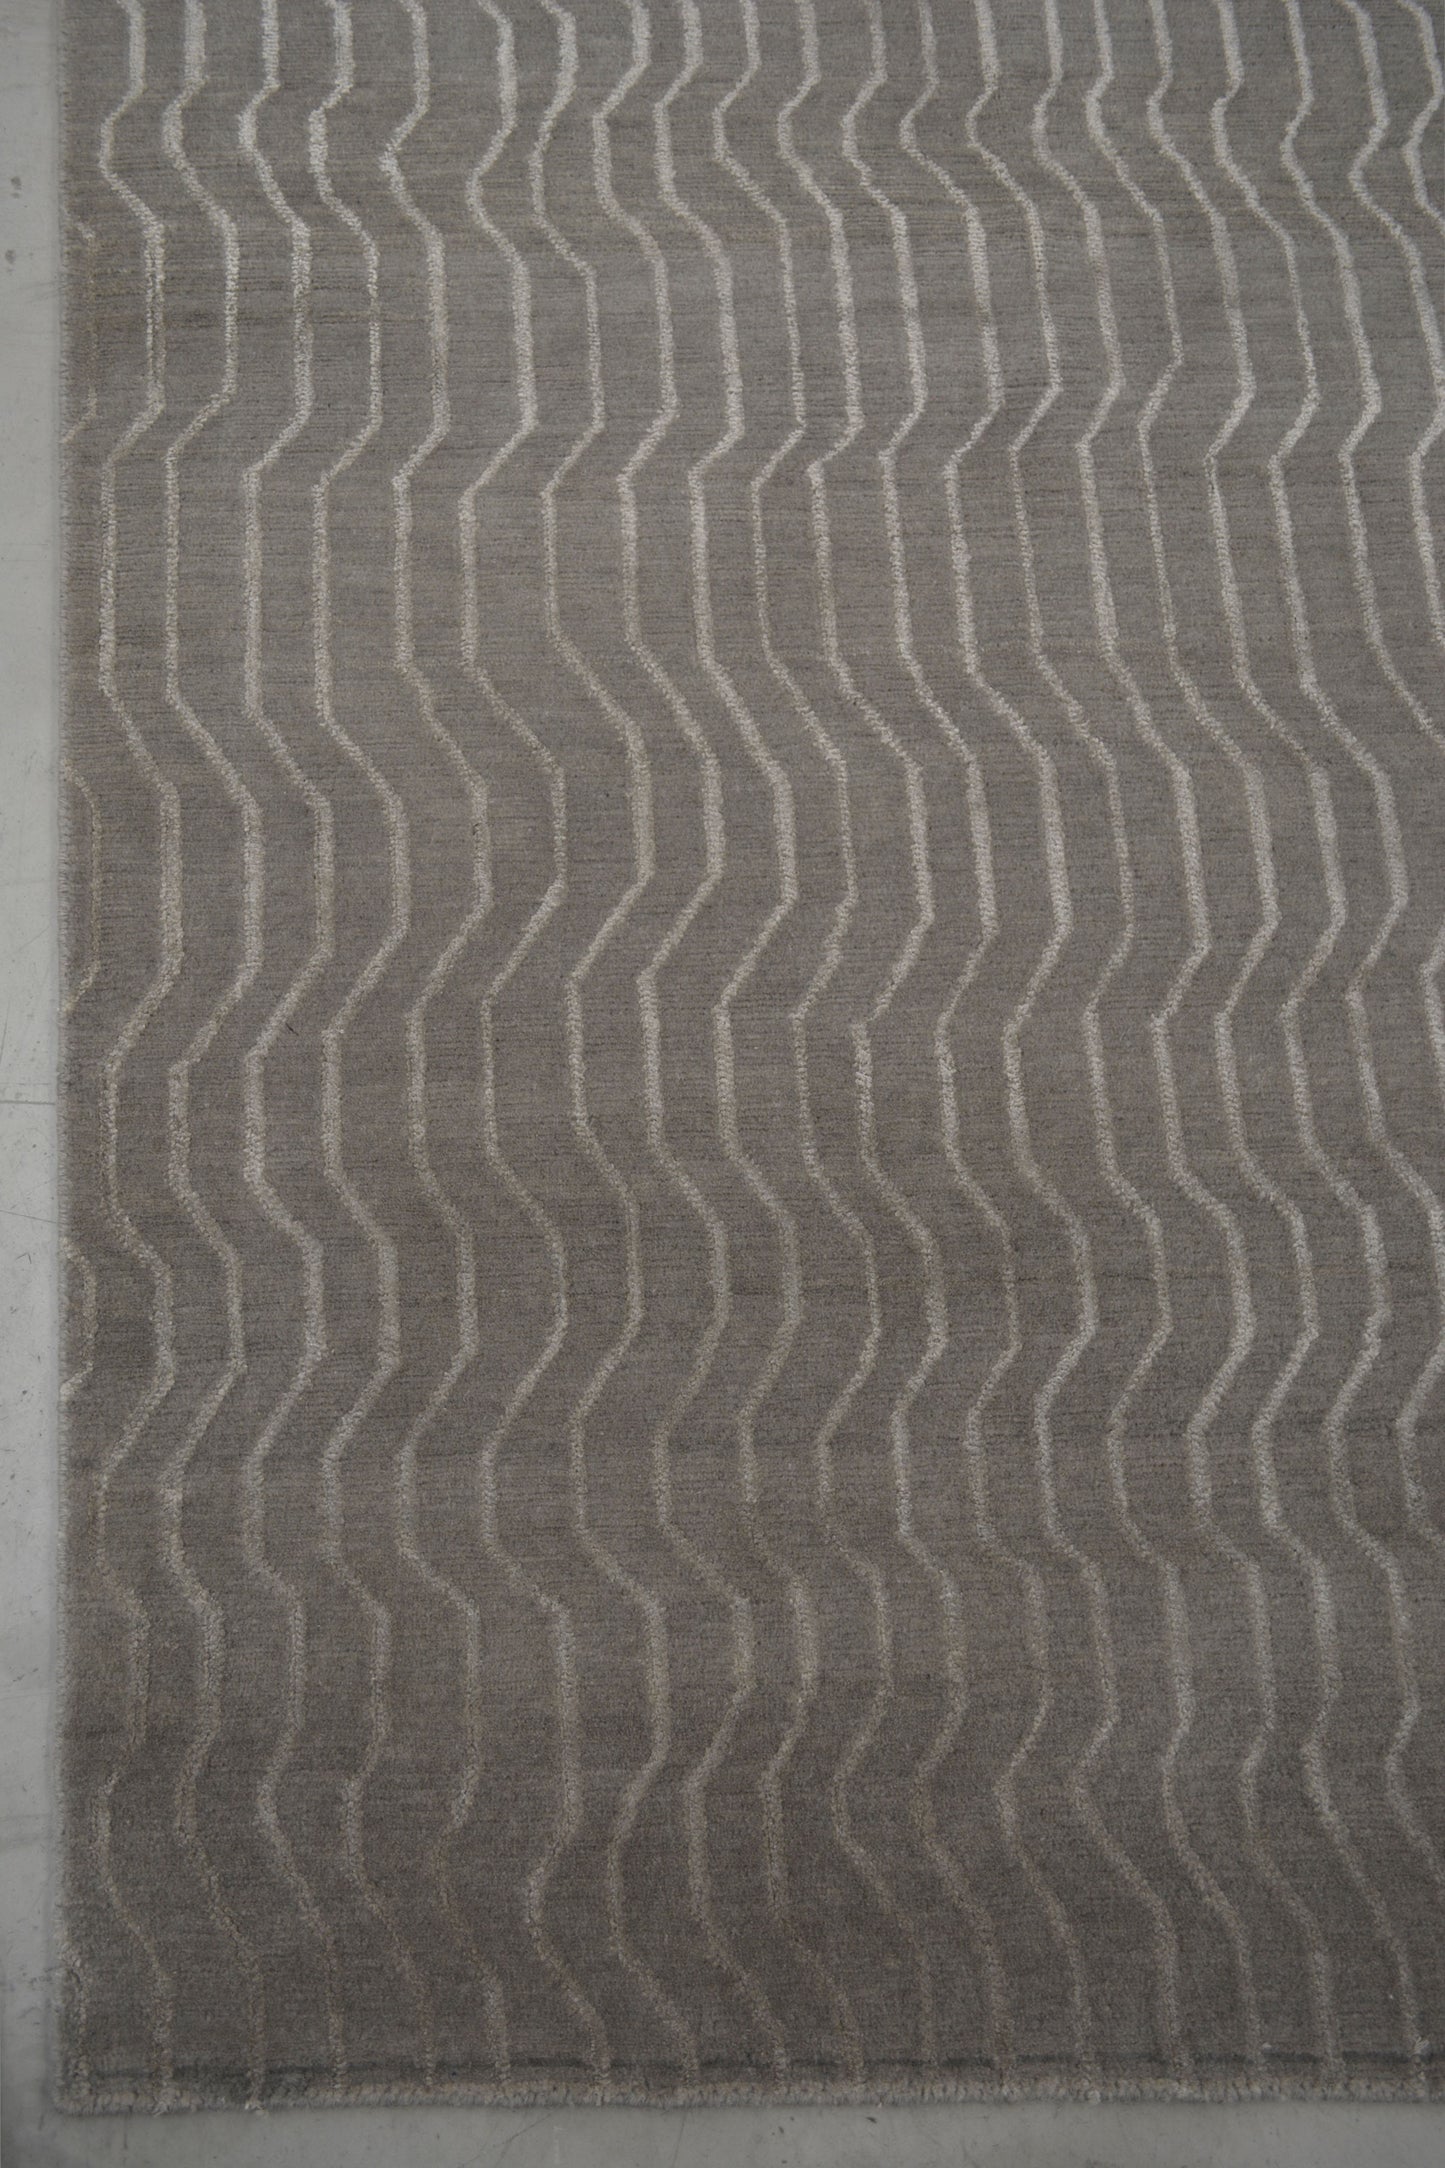 From the bottom left corner, the wave pattern takes over the whole rug symmetrically.